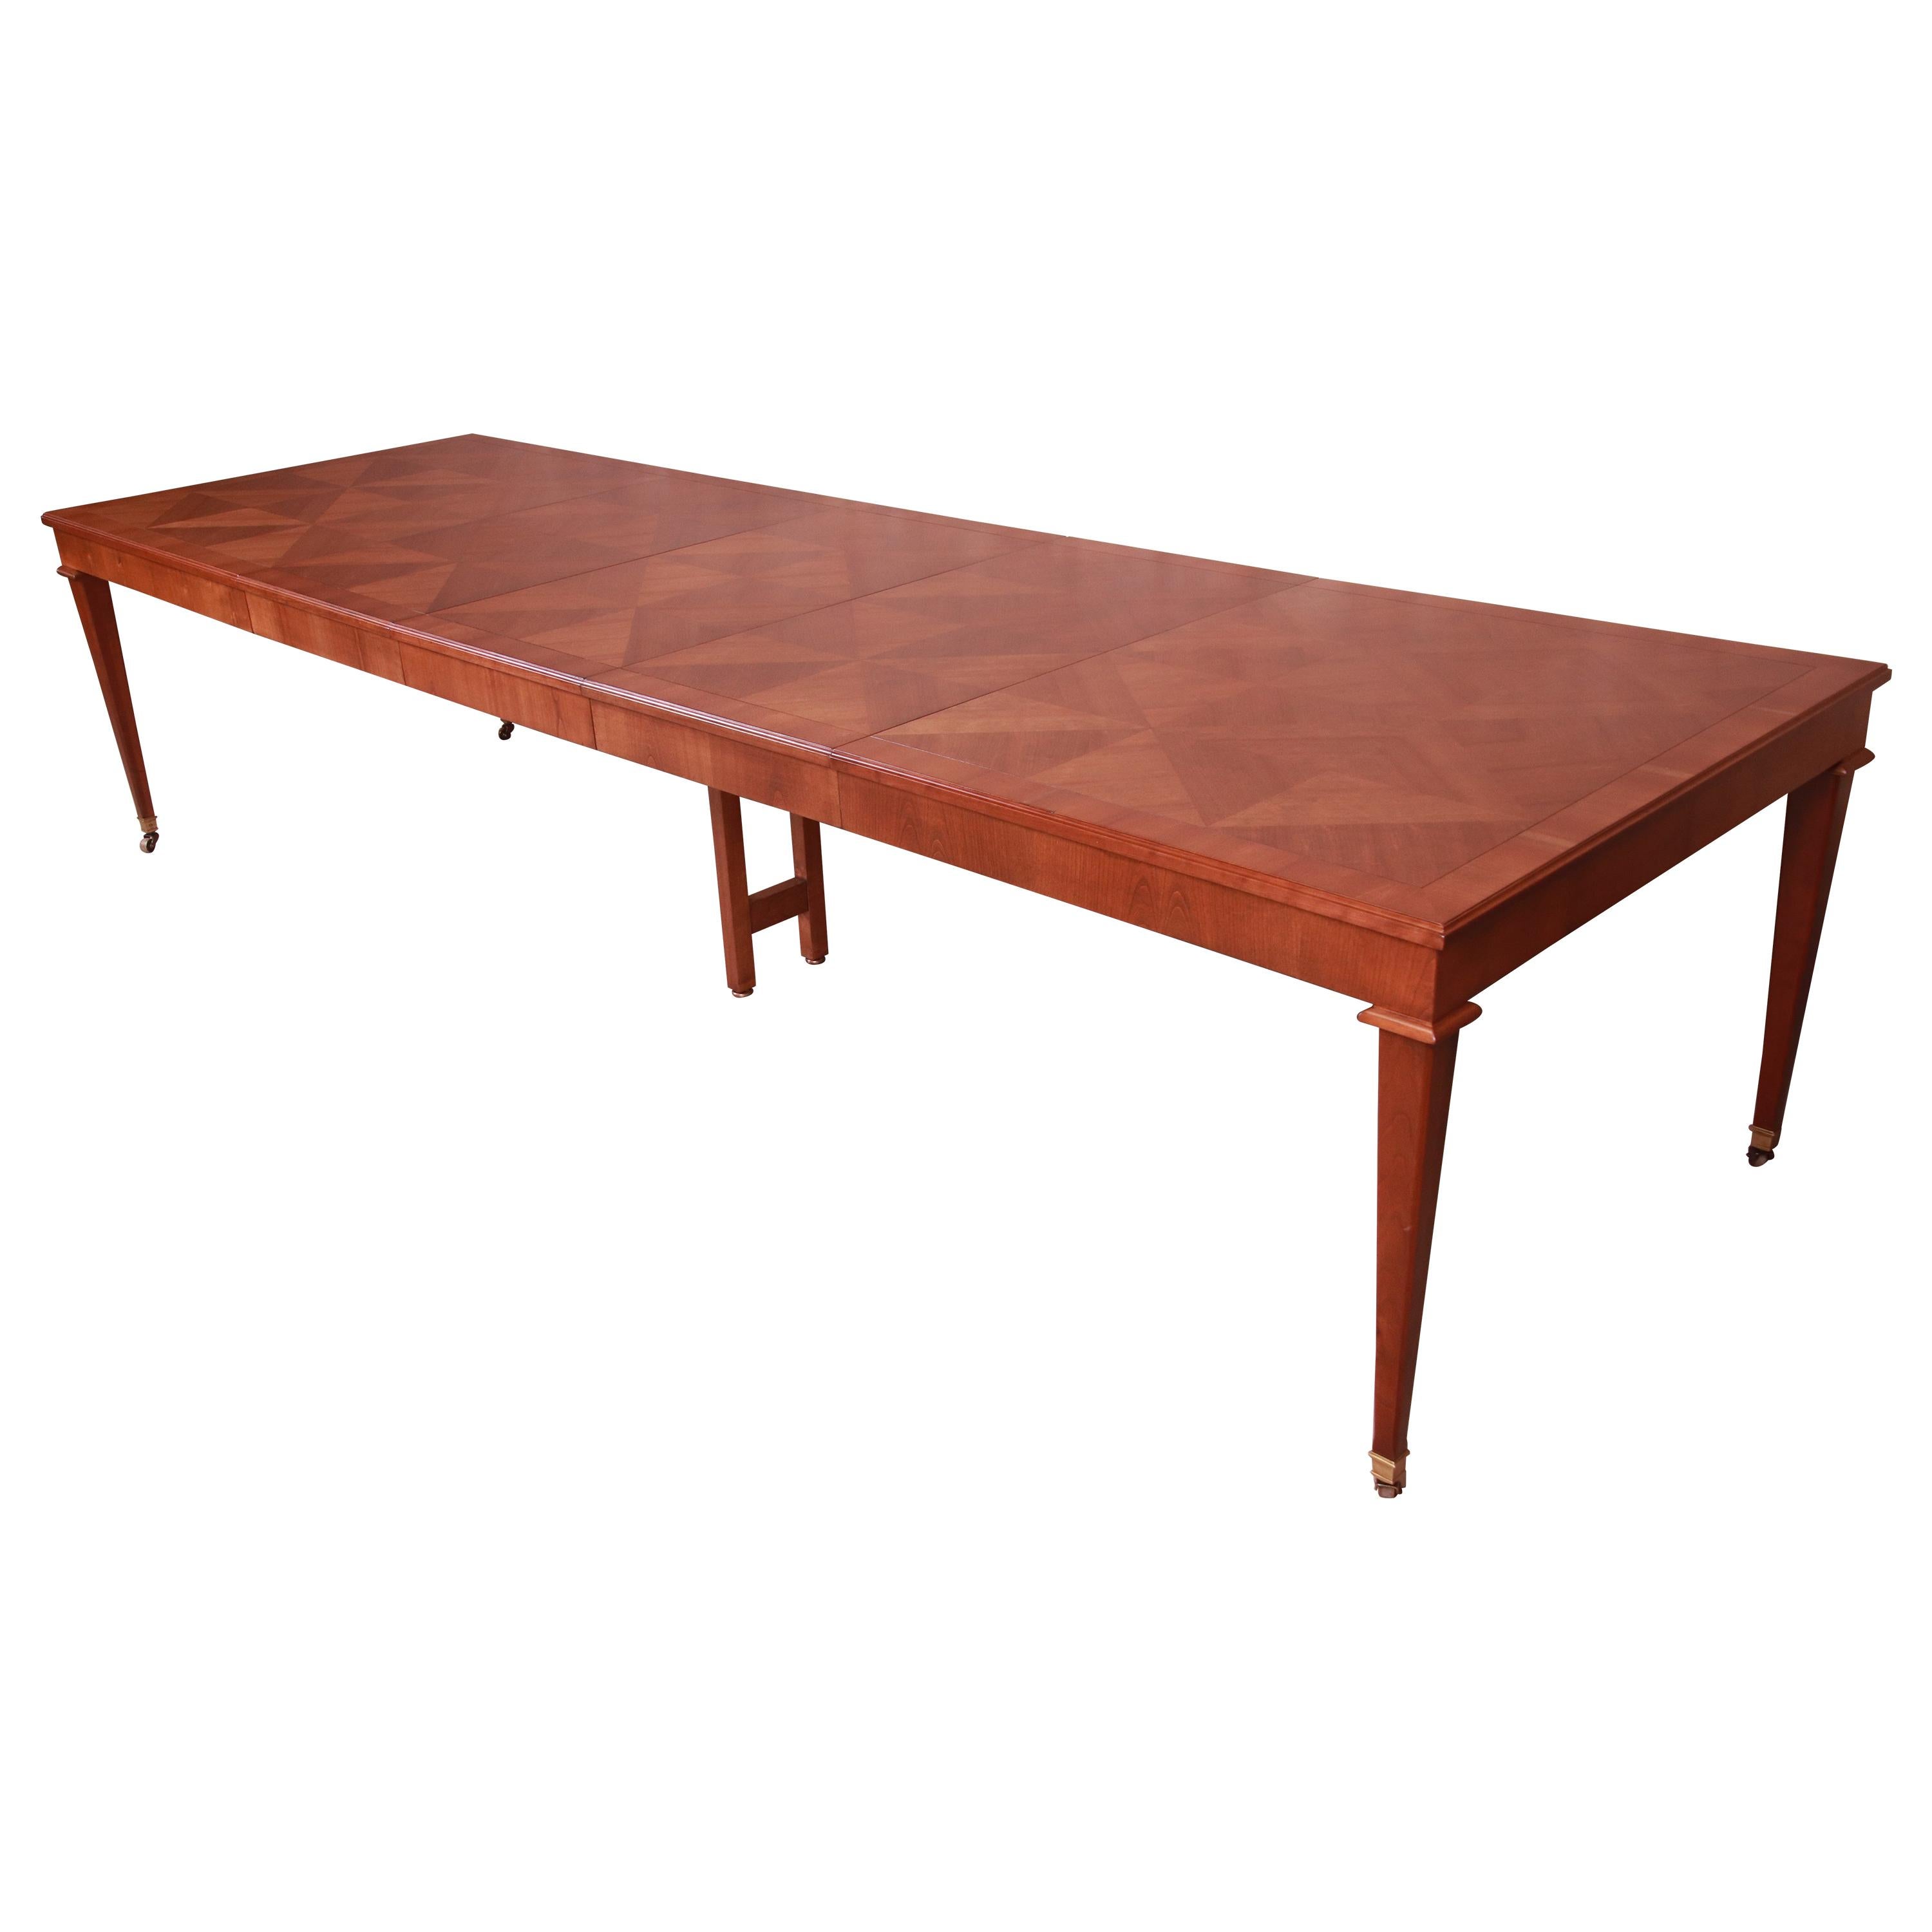 Baker Furniture French Regency Cherry Wood Extension Dining Table, Refinished